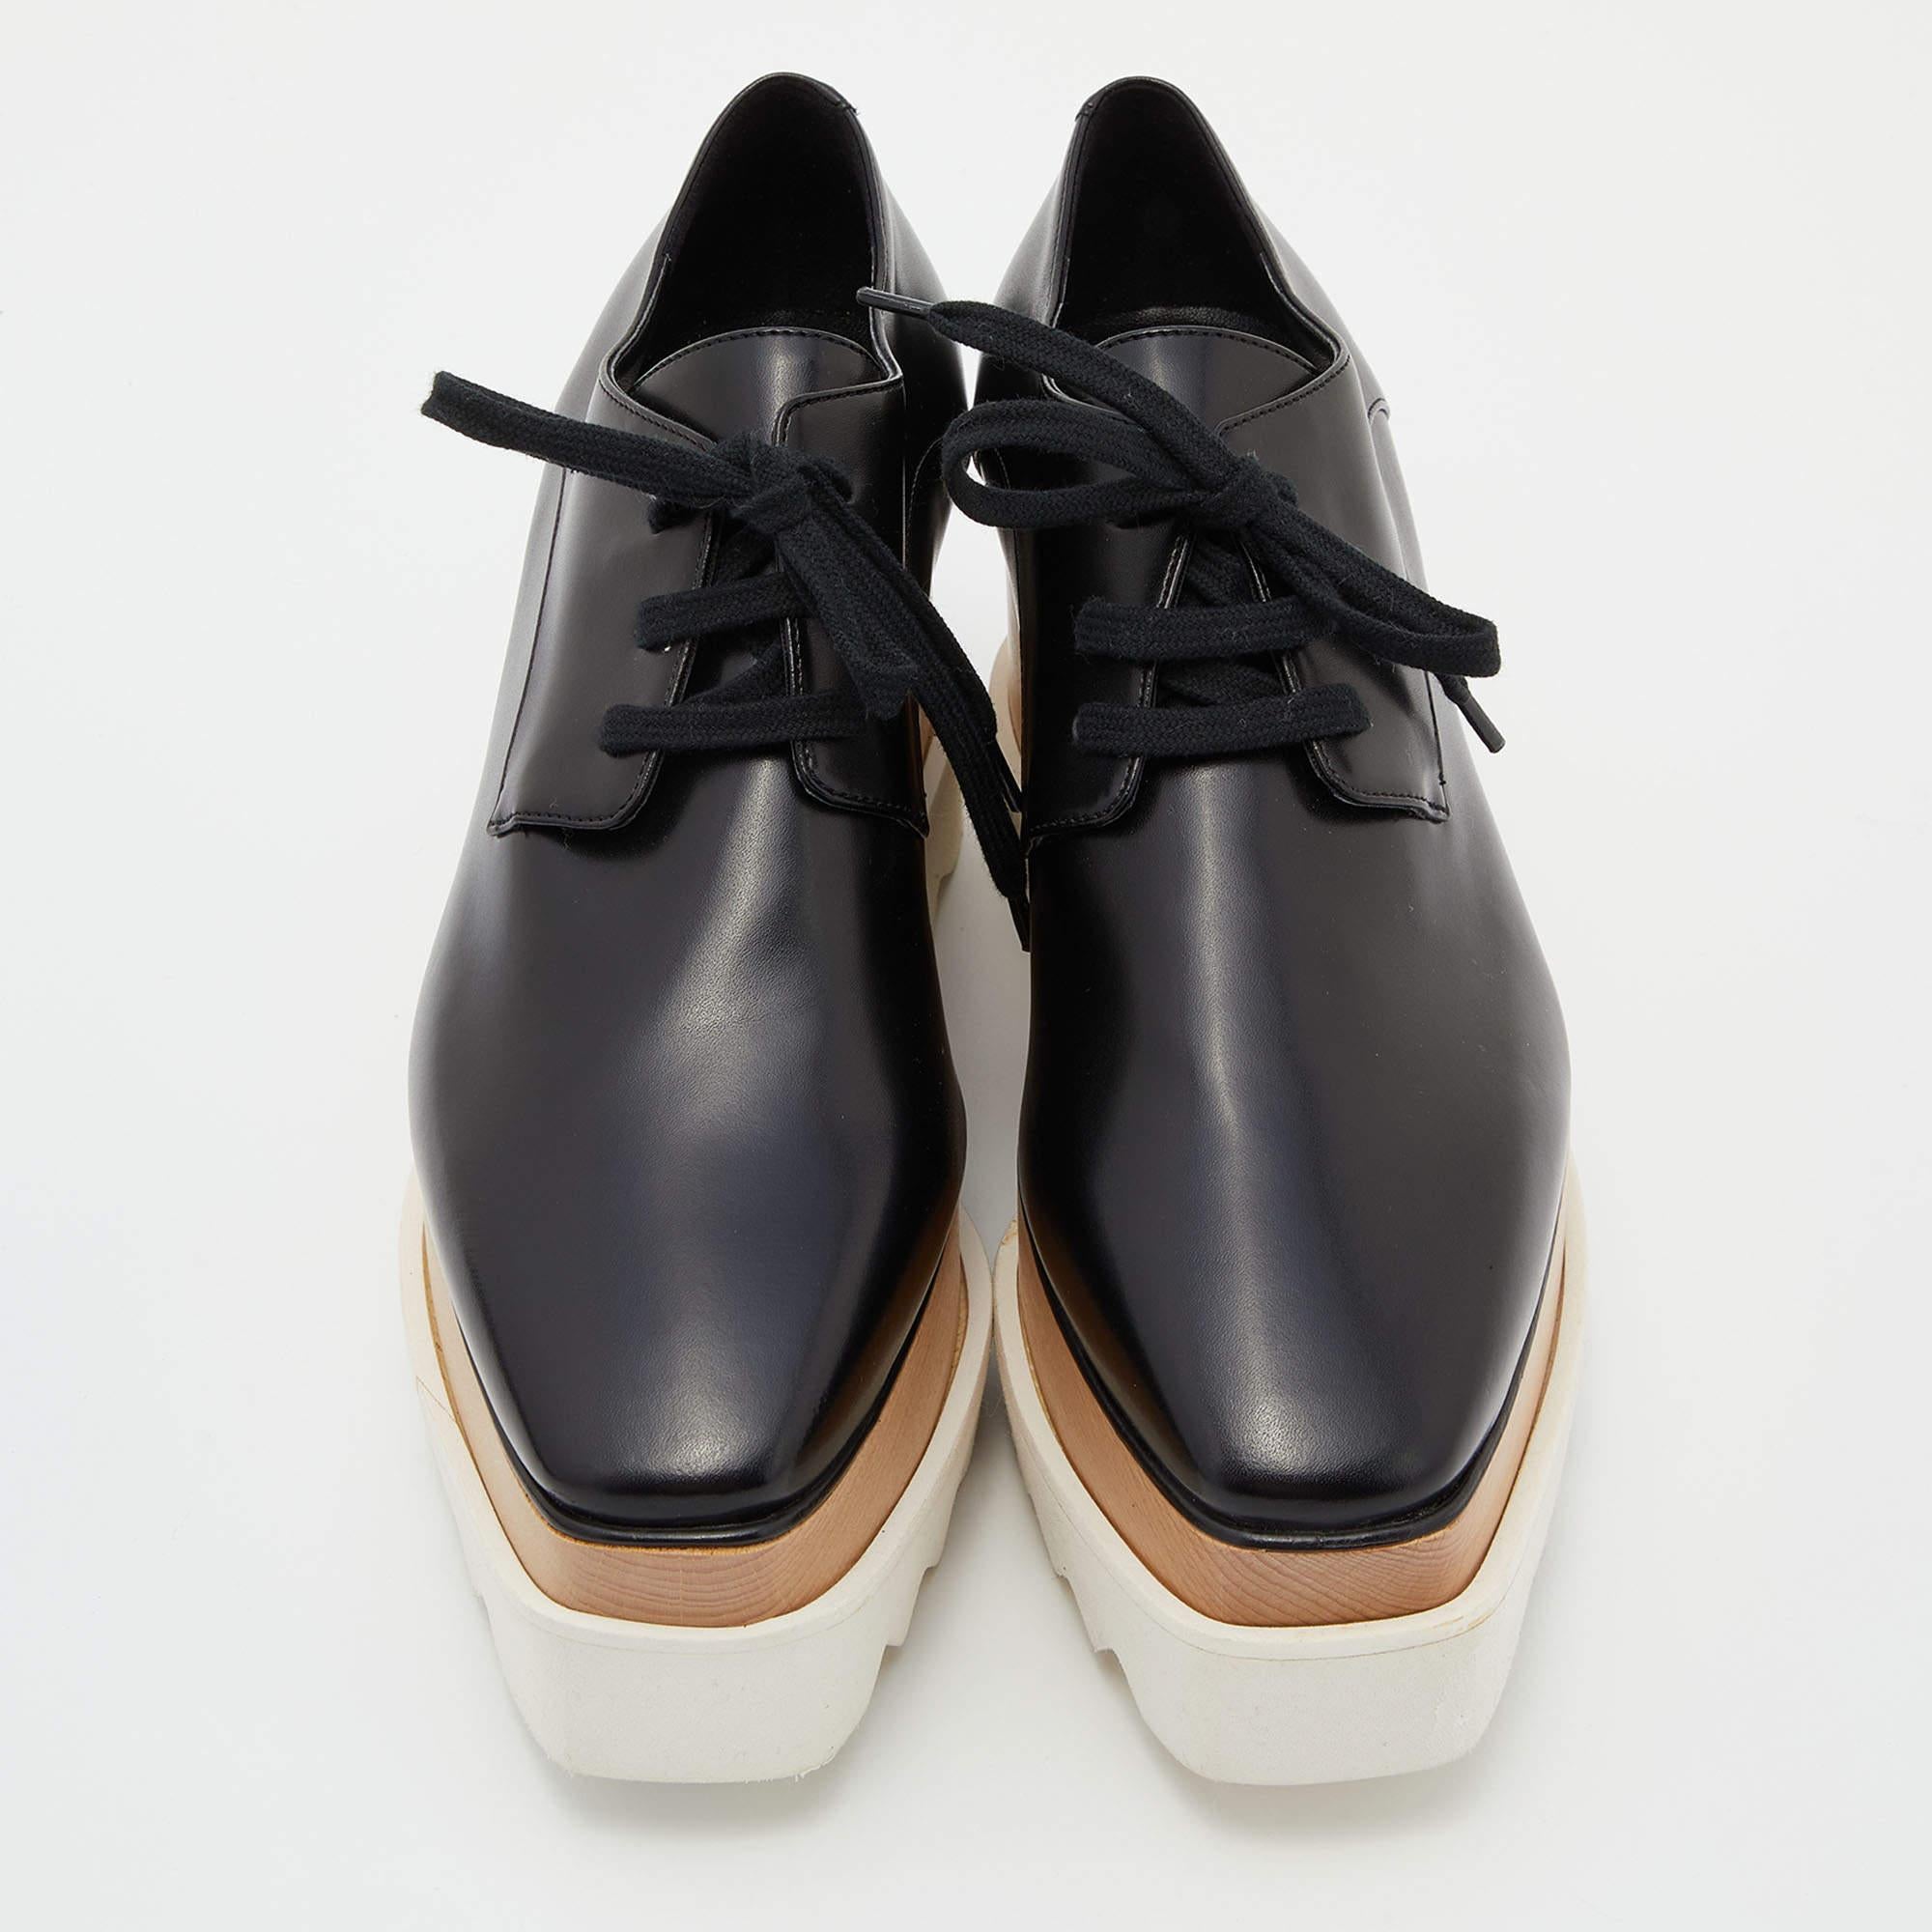 The Stella McCartney sneakers are a stylish and sustainable choice. Made from high-quality faux leather, they feature a derby shoe design with a platform sole for added height and comfort. These sneakers combine fashion and ethics, perfect for those